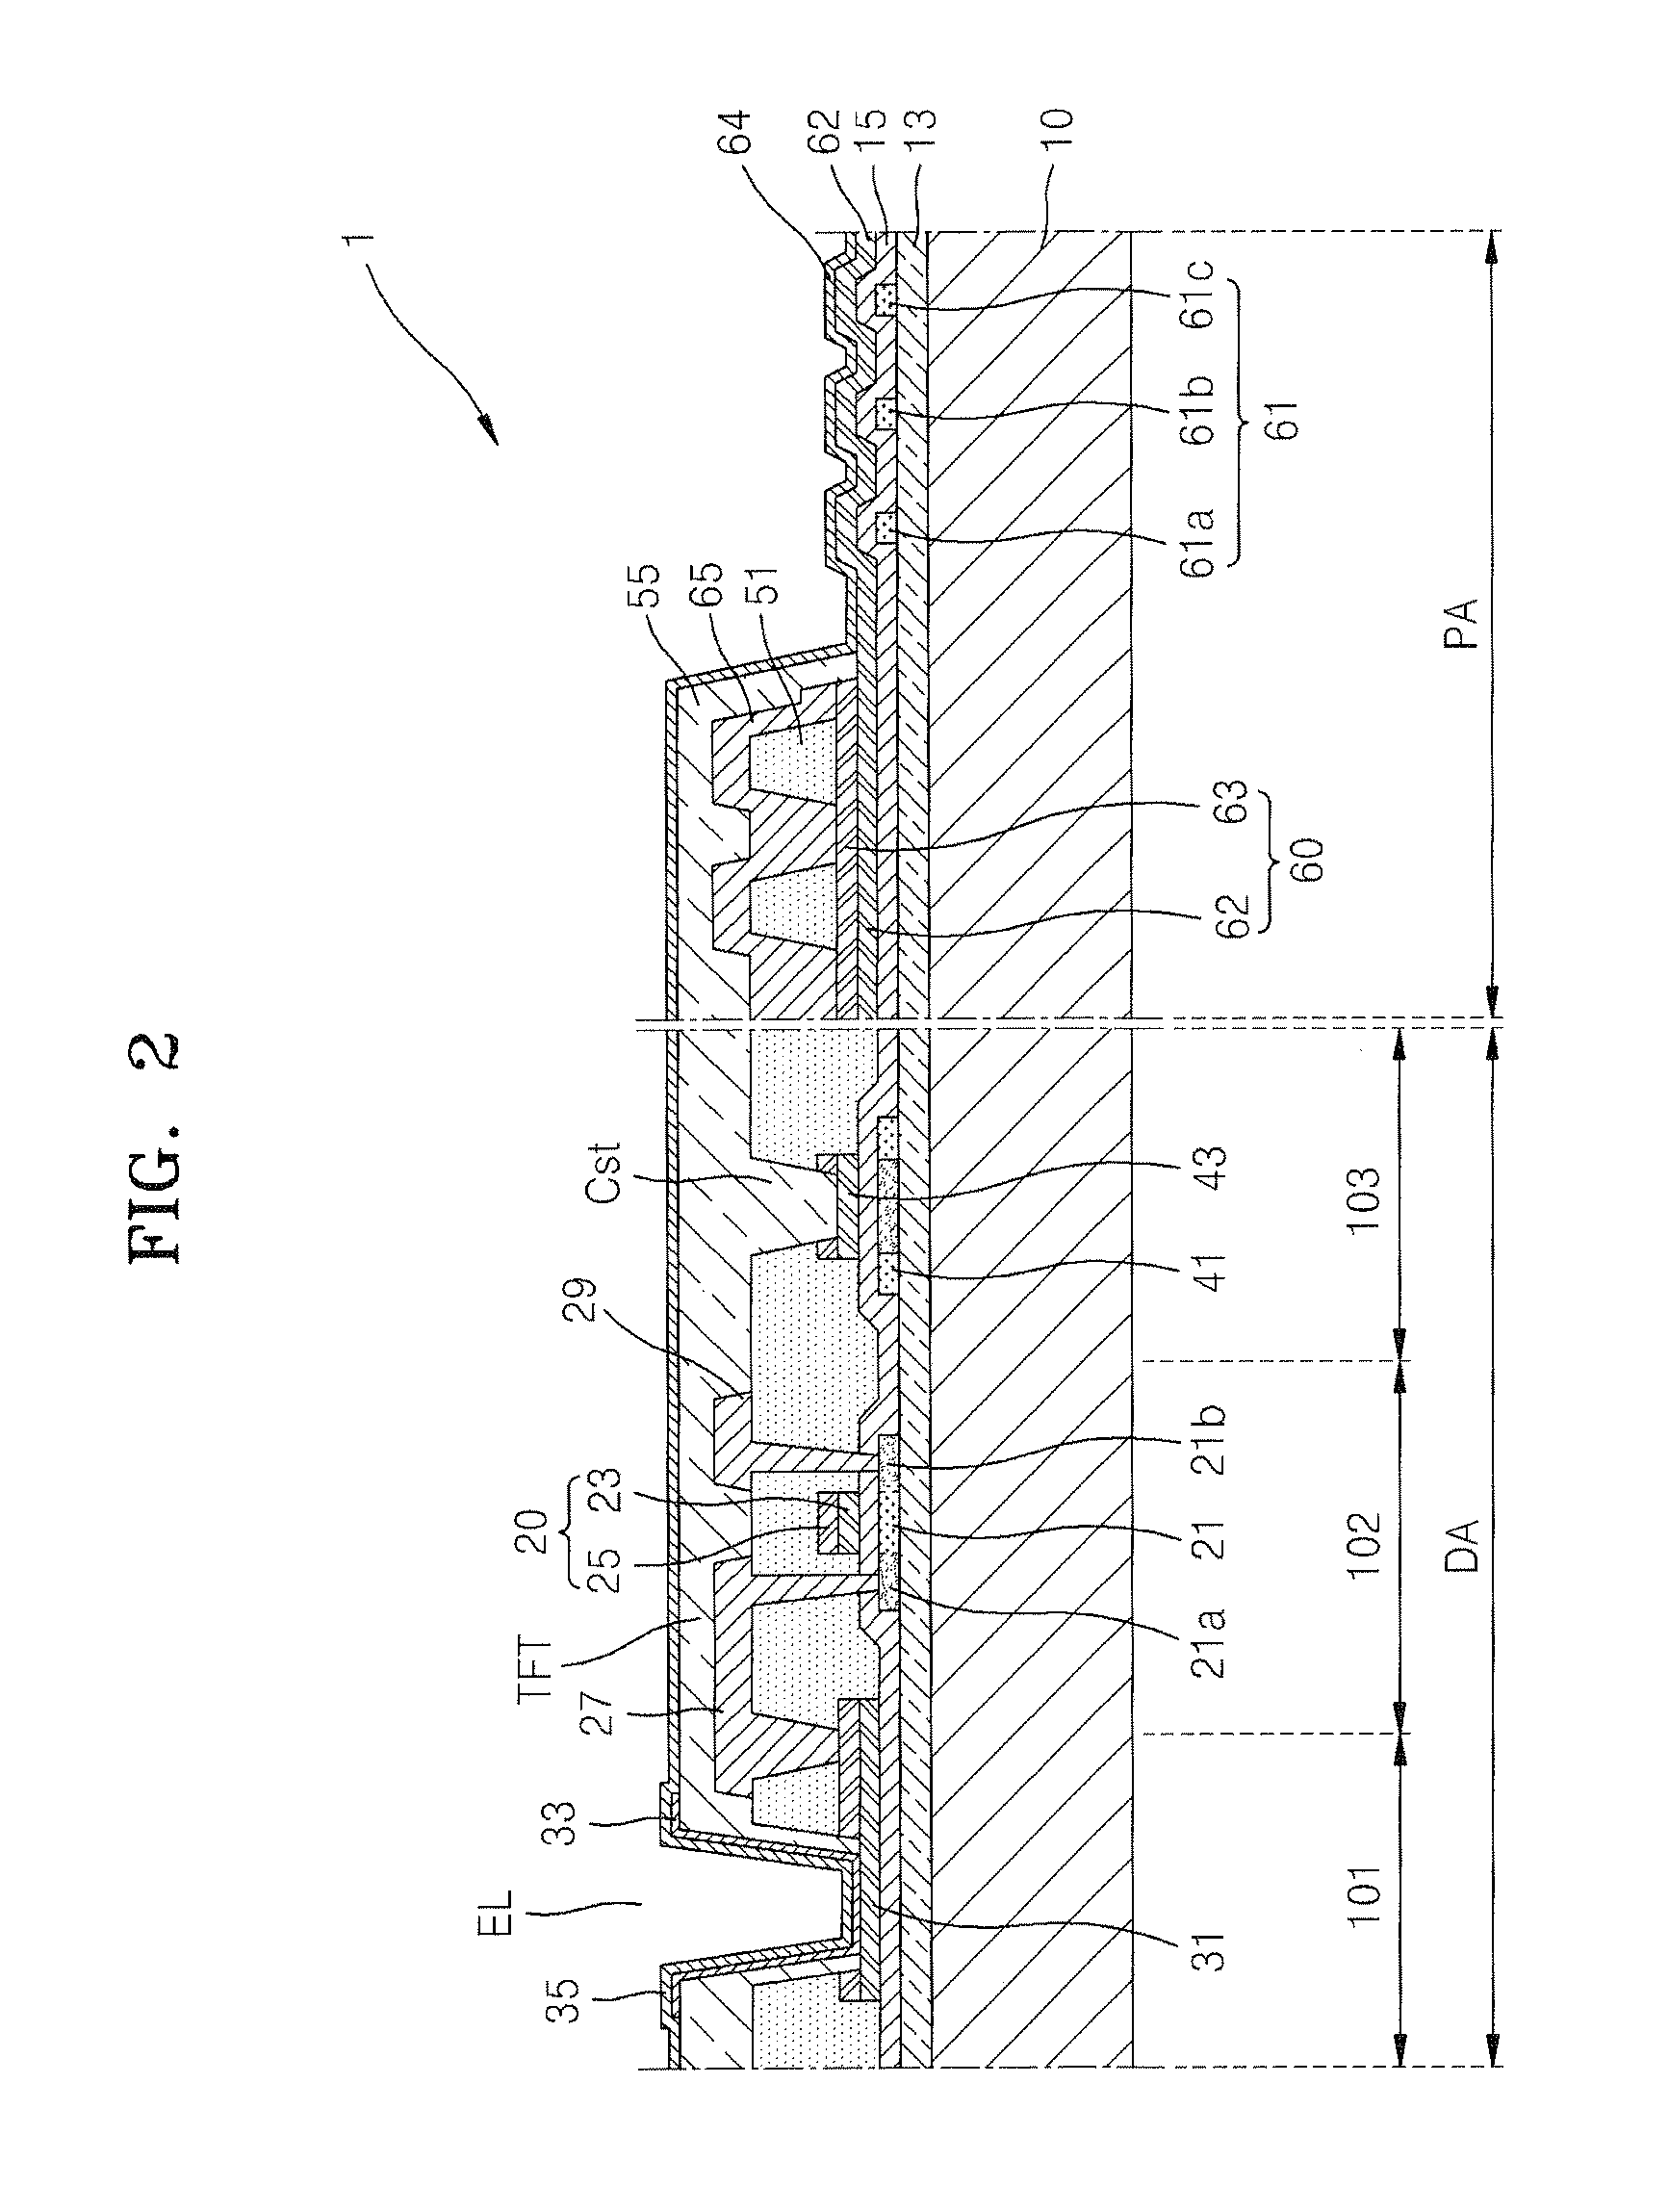 Organic light-emitting display apparatus that prevents a thick organic insulating layer from lifting